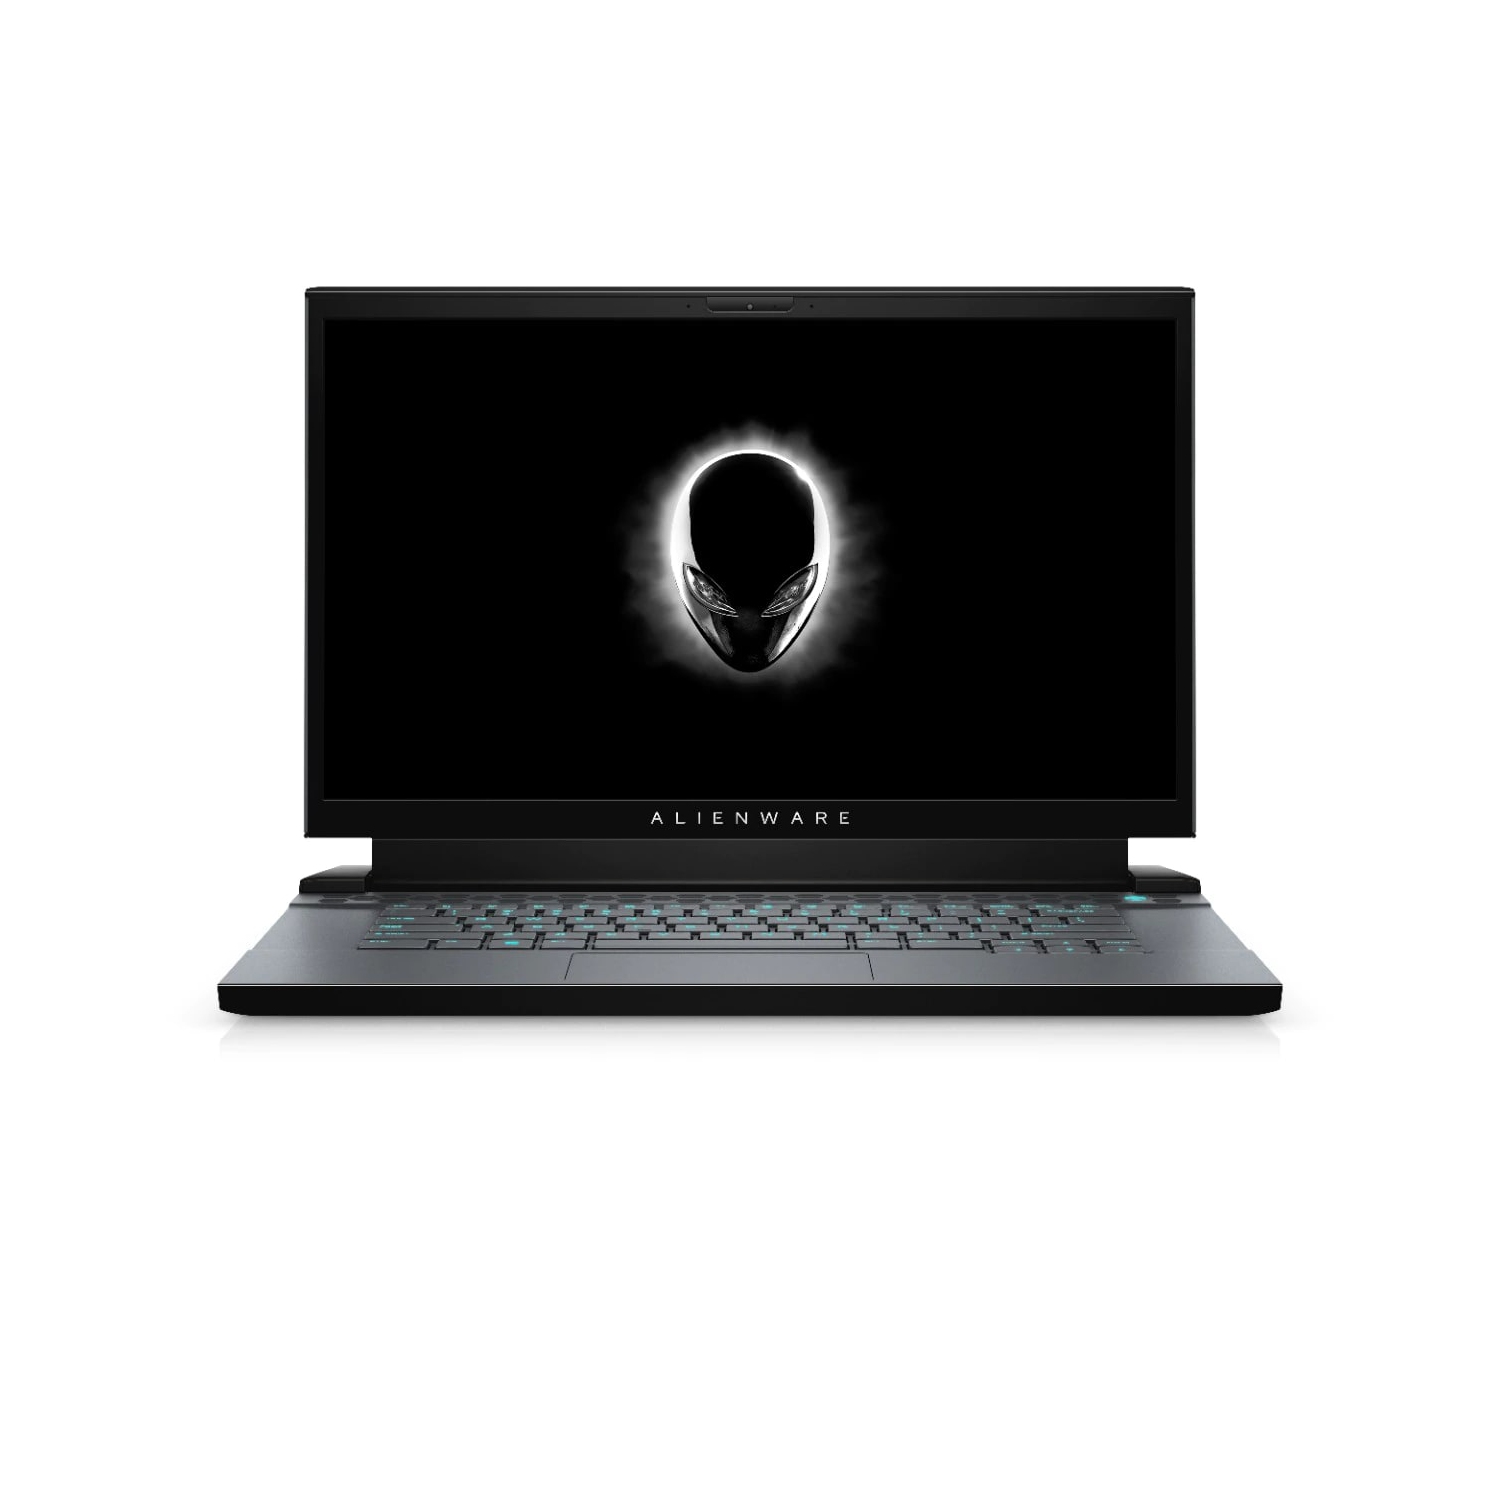 Refurbished (Excellent) - Dell Alienware m15 R2 Gaming Laptop (2019), 15.6" FHD, Core i7, 1TB SSD + 1TB SSD, 16GB RAM, RTX 2060, 6 Cores @ 4.5 GHz Certified Refurbished